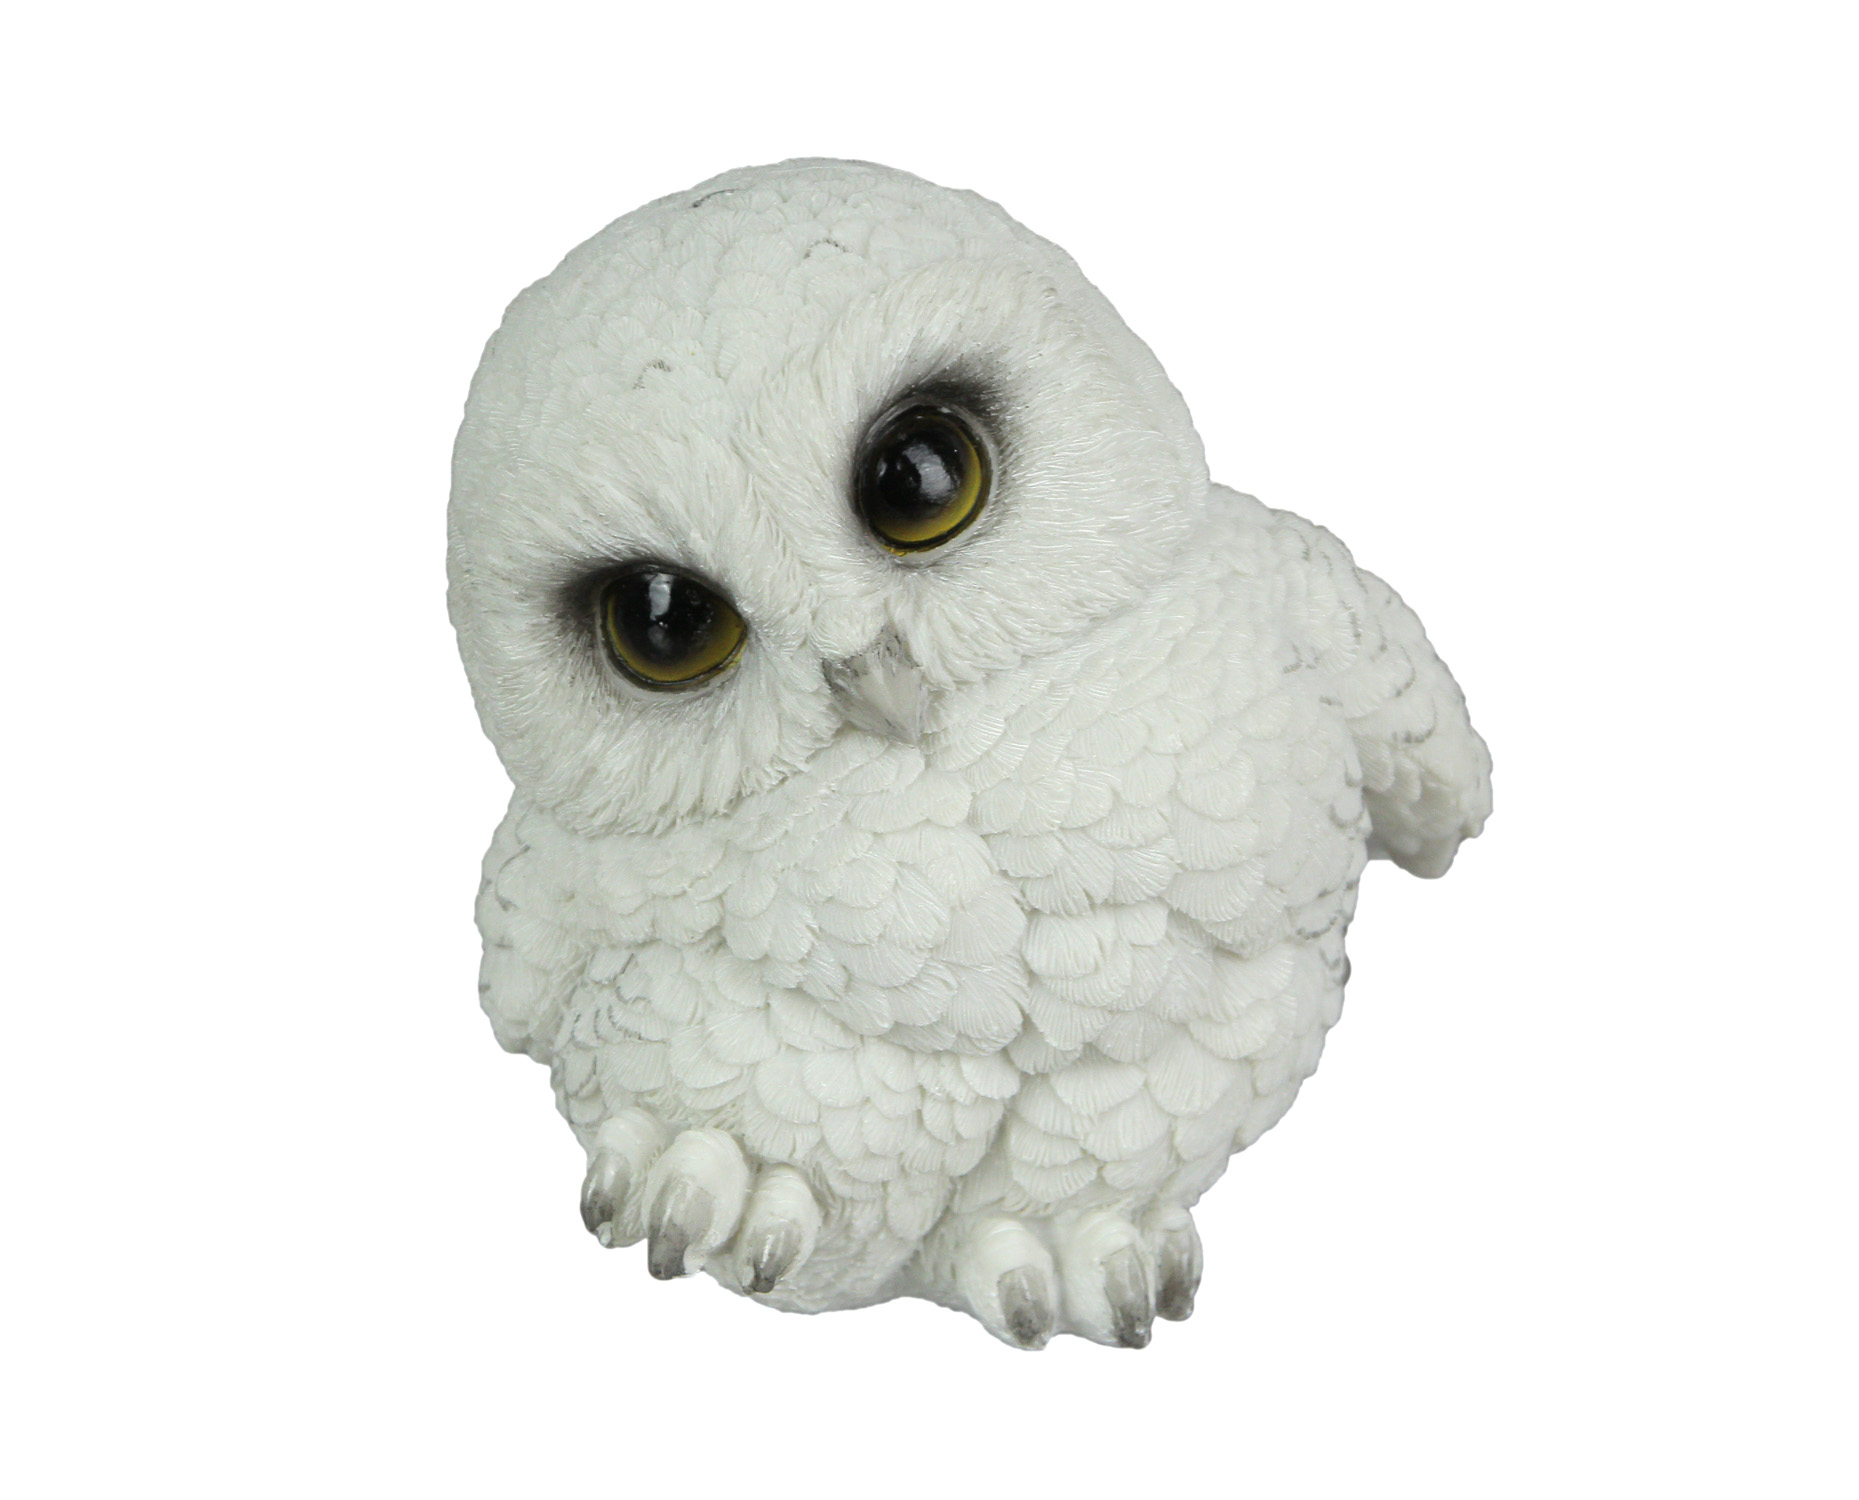 Everspring Adorable Big Eyed White Baby Snowy Owl Mini Statue 4.75 inches High - image 1 of 4